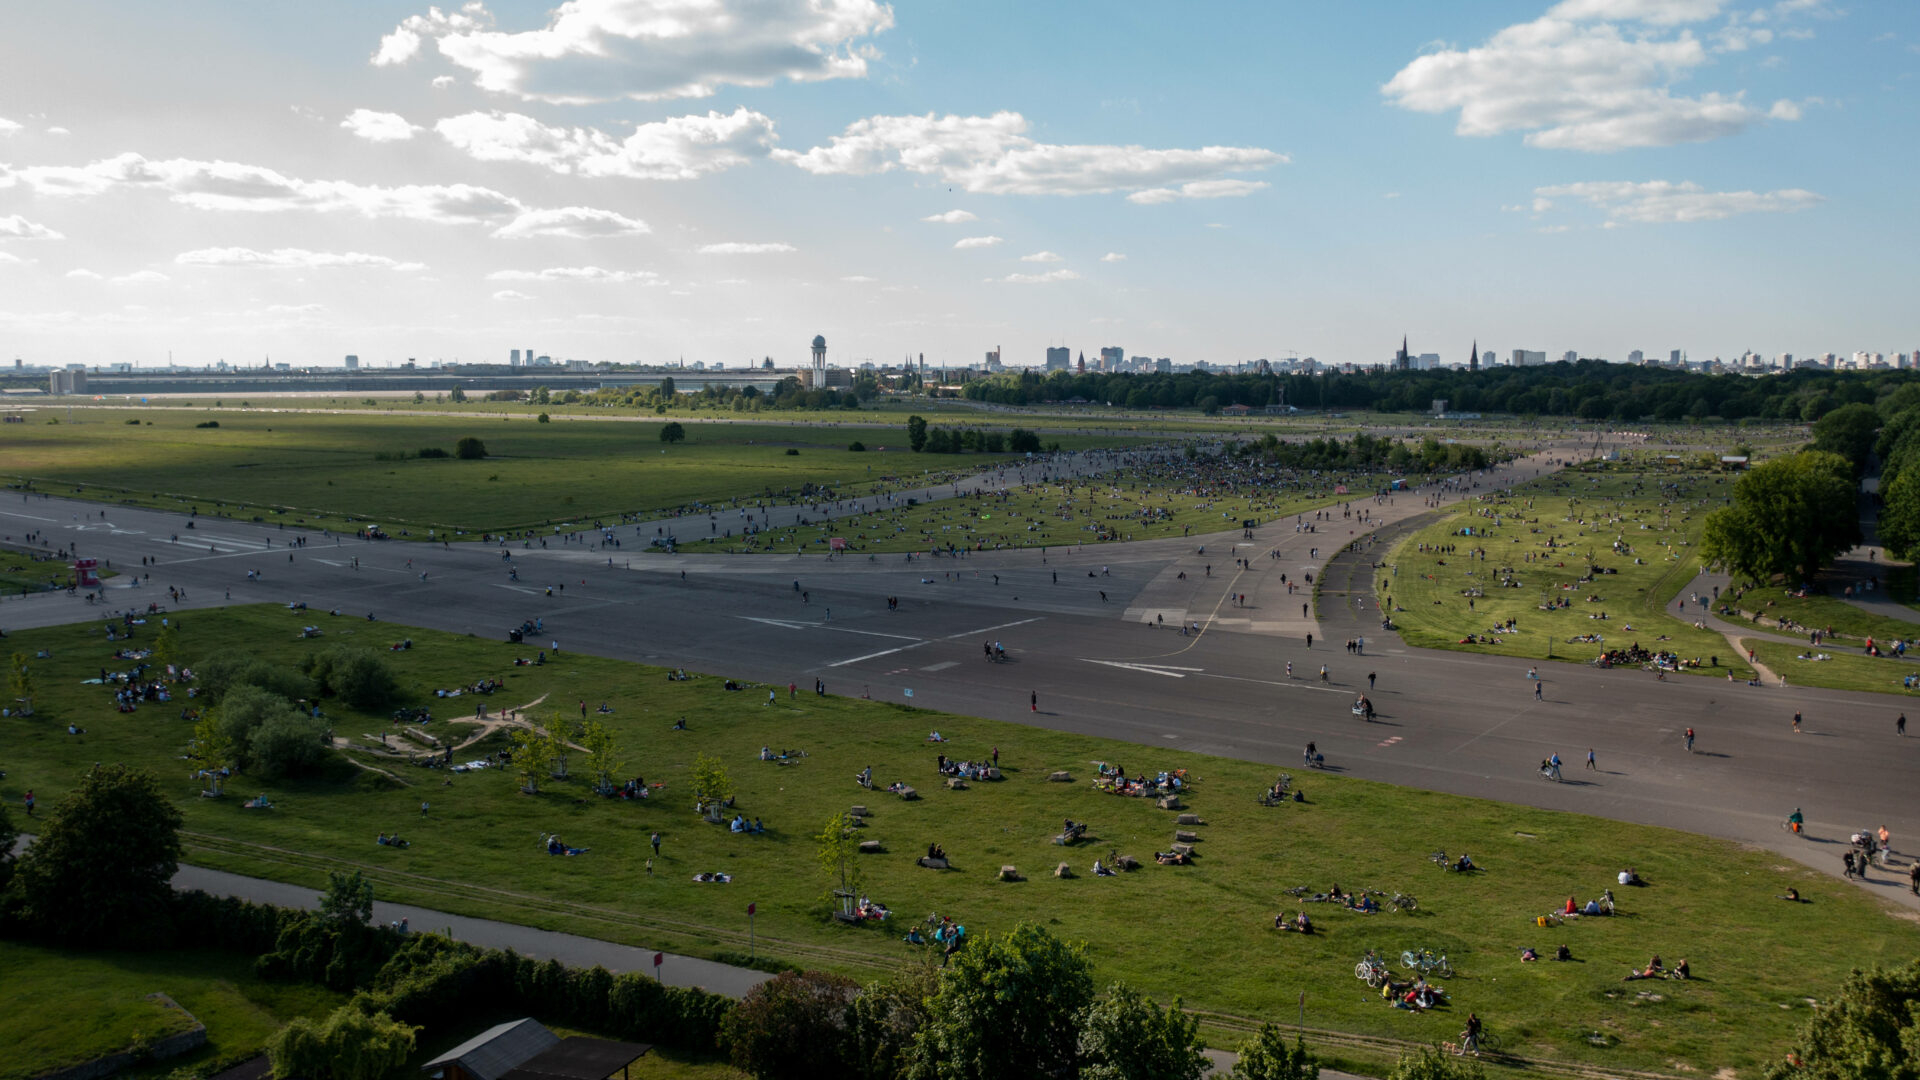 BERLIN, GERMANY - MAY 30: In an aerial view, people relax at Tempelhofer Feld public park during the coronavirus pandemic on May 30, 2021 in Berlin, Germany. While the pandemic is continuing in Germany, infection rates have come down sharply and the number of vaccinations is climbing steadily, allowing authorities to ease many lockdown measures and giving Germans hope that a return to normalcy is getting closer. (Photo by Christian Ender/Getty Images)